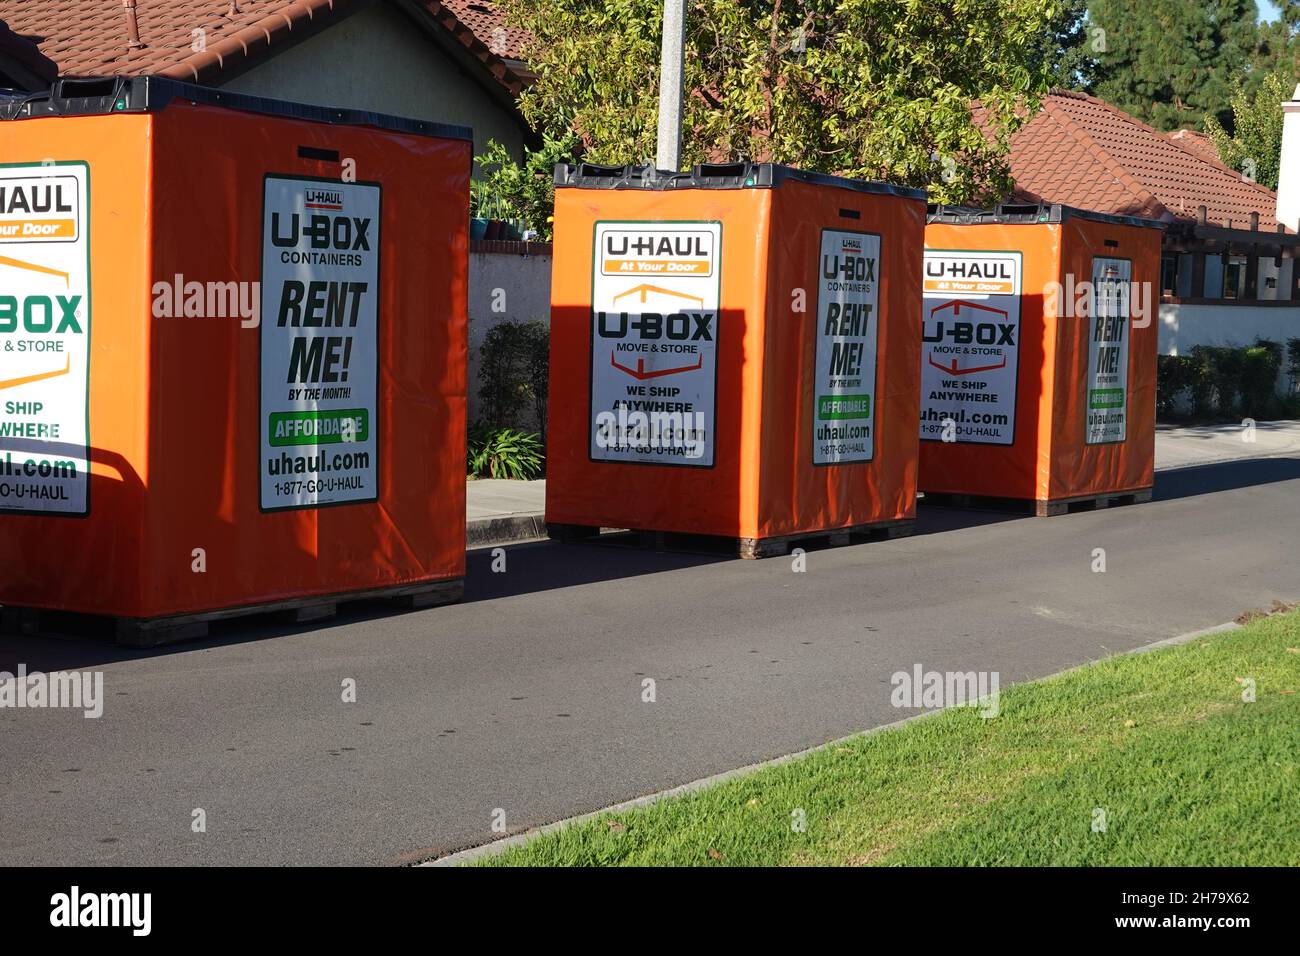 https://c8.alamy.com/comp/2H79X62/u-haul-u-box-portable-storage-and-moving-containers-outside-a-home-in-california-2H79X62.jpg